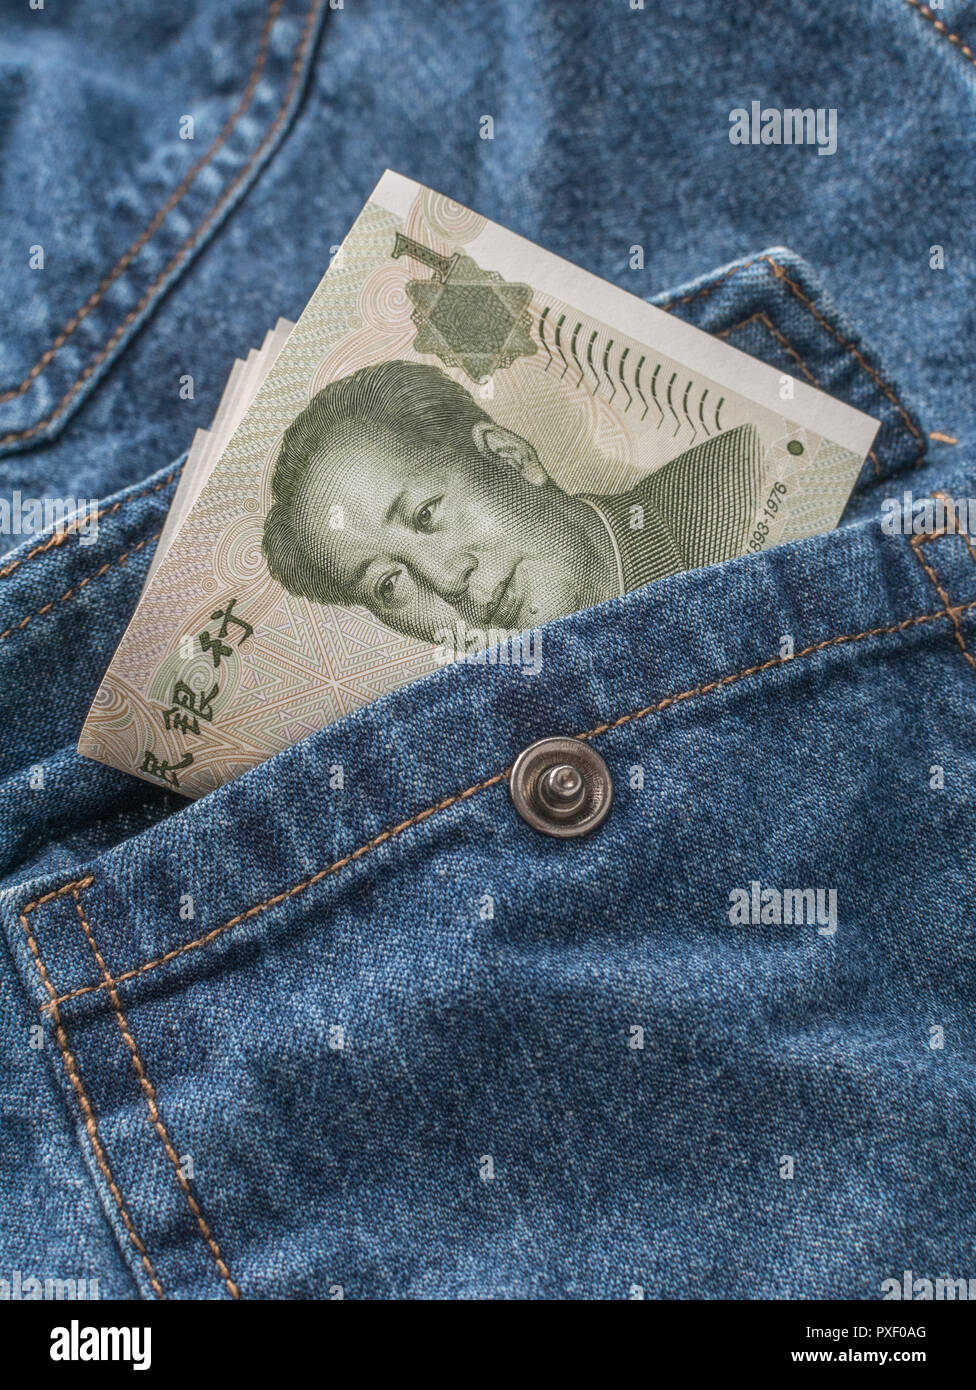 Chinese Yuan / Renminbi banknotes with pocket - metaphor for personal earnings, Chinese wages, wage levels, China garment industry. Stock Photo